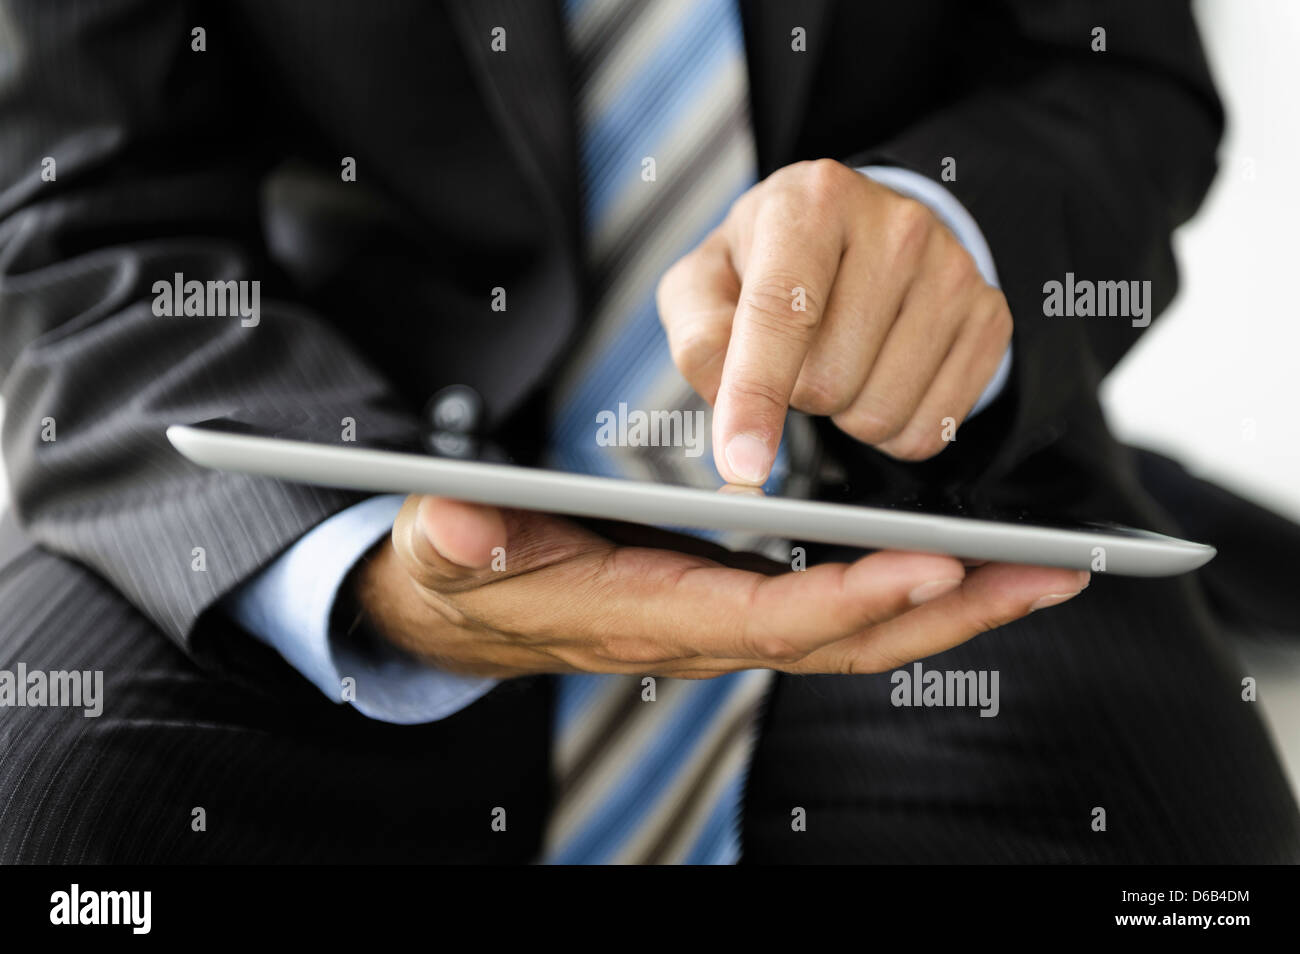 Businessman using tablet computer Stock Photo